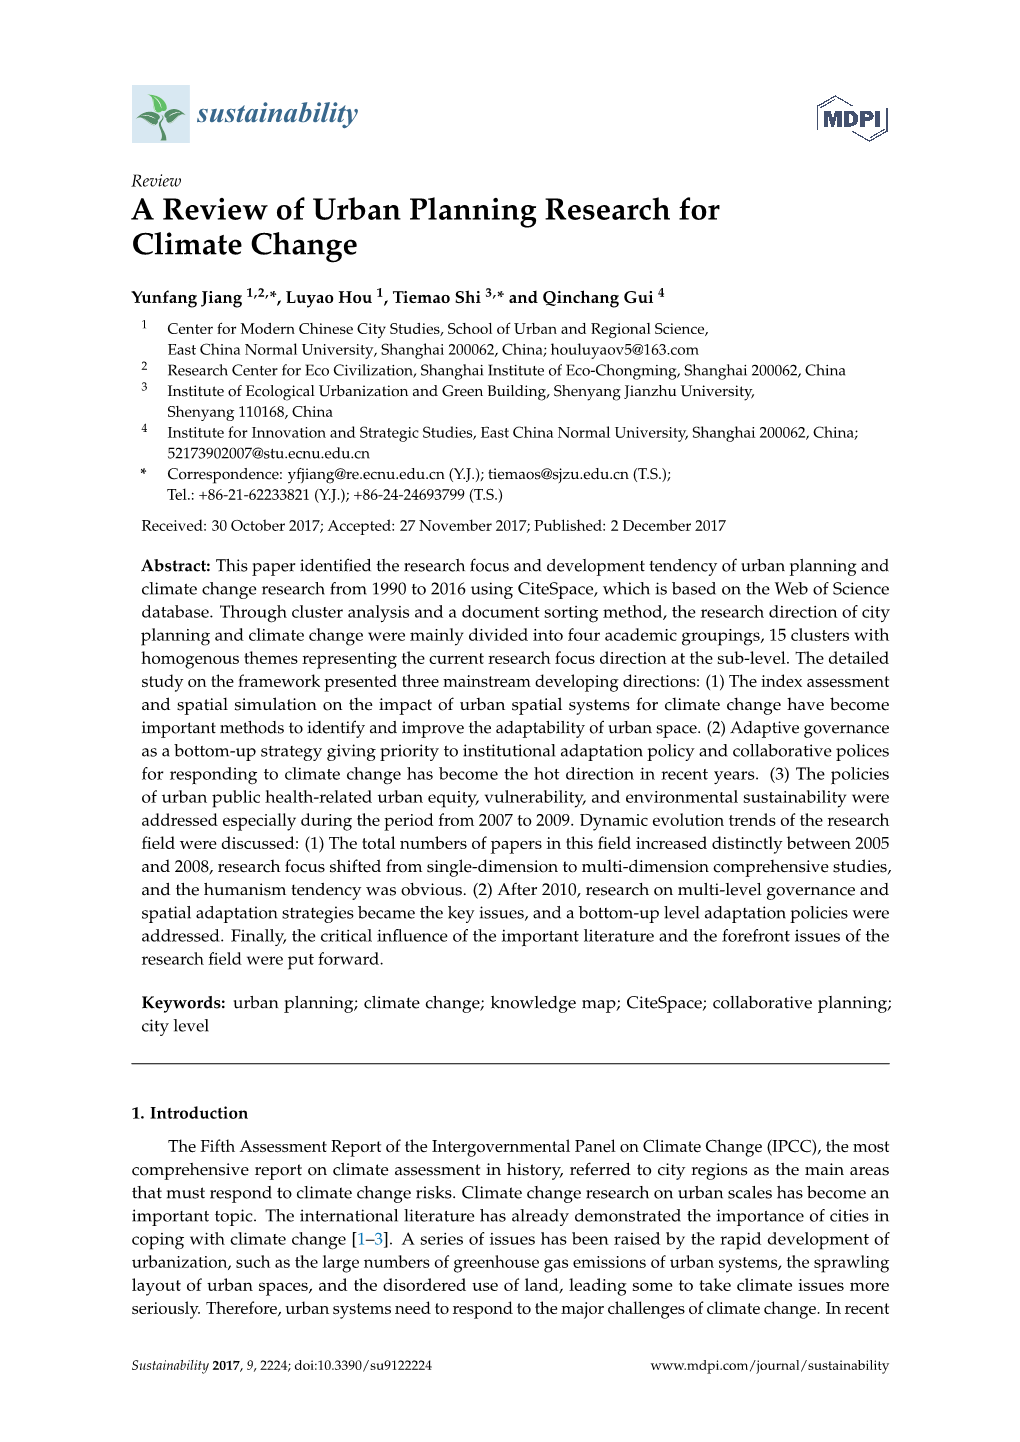 A Review of Urban Planning Research for Climate Change